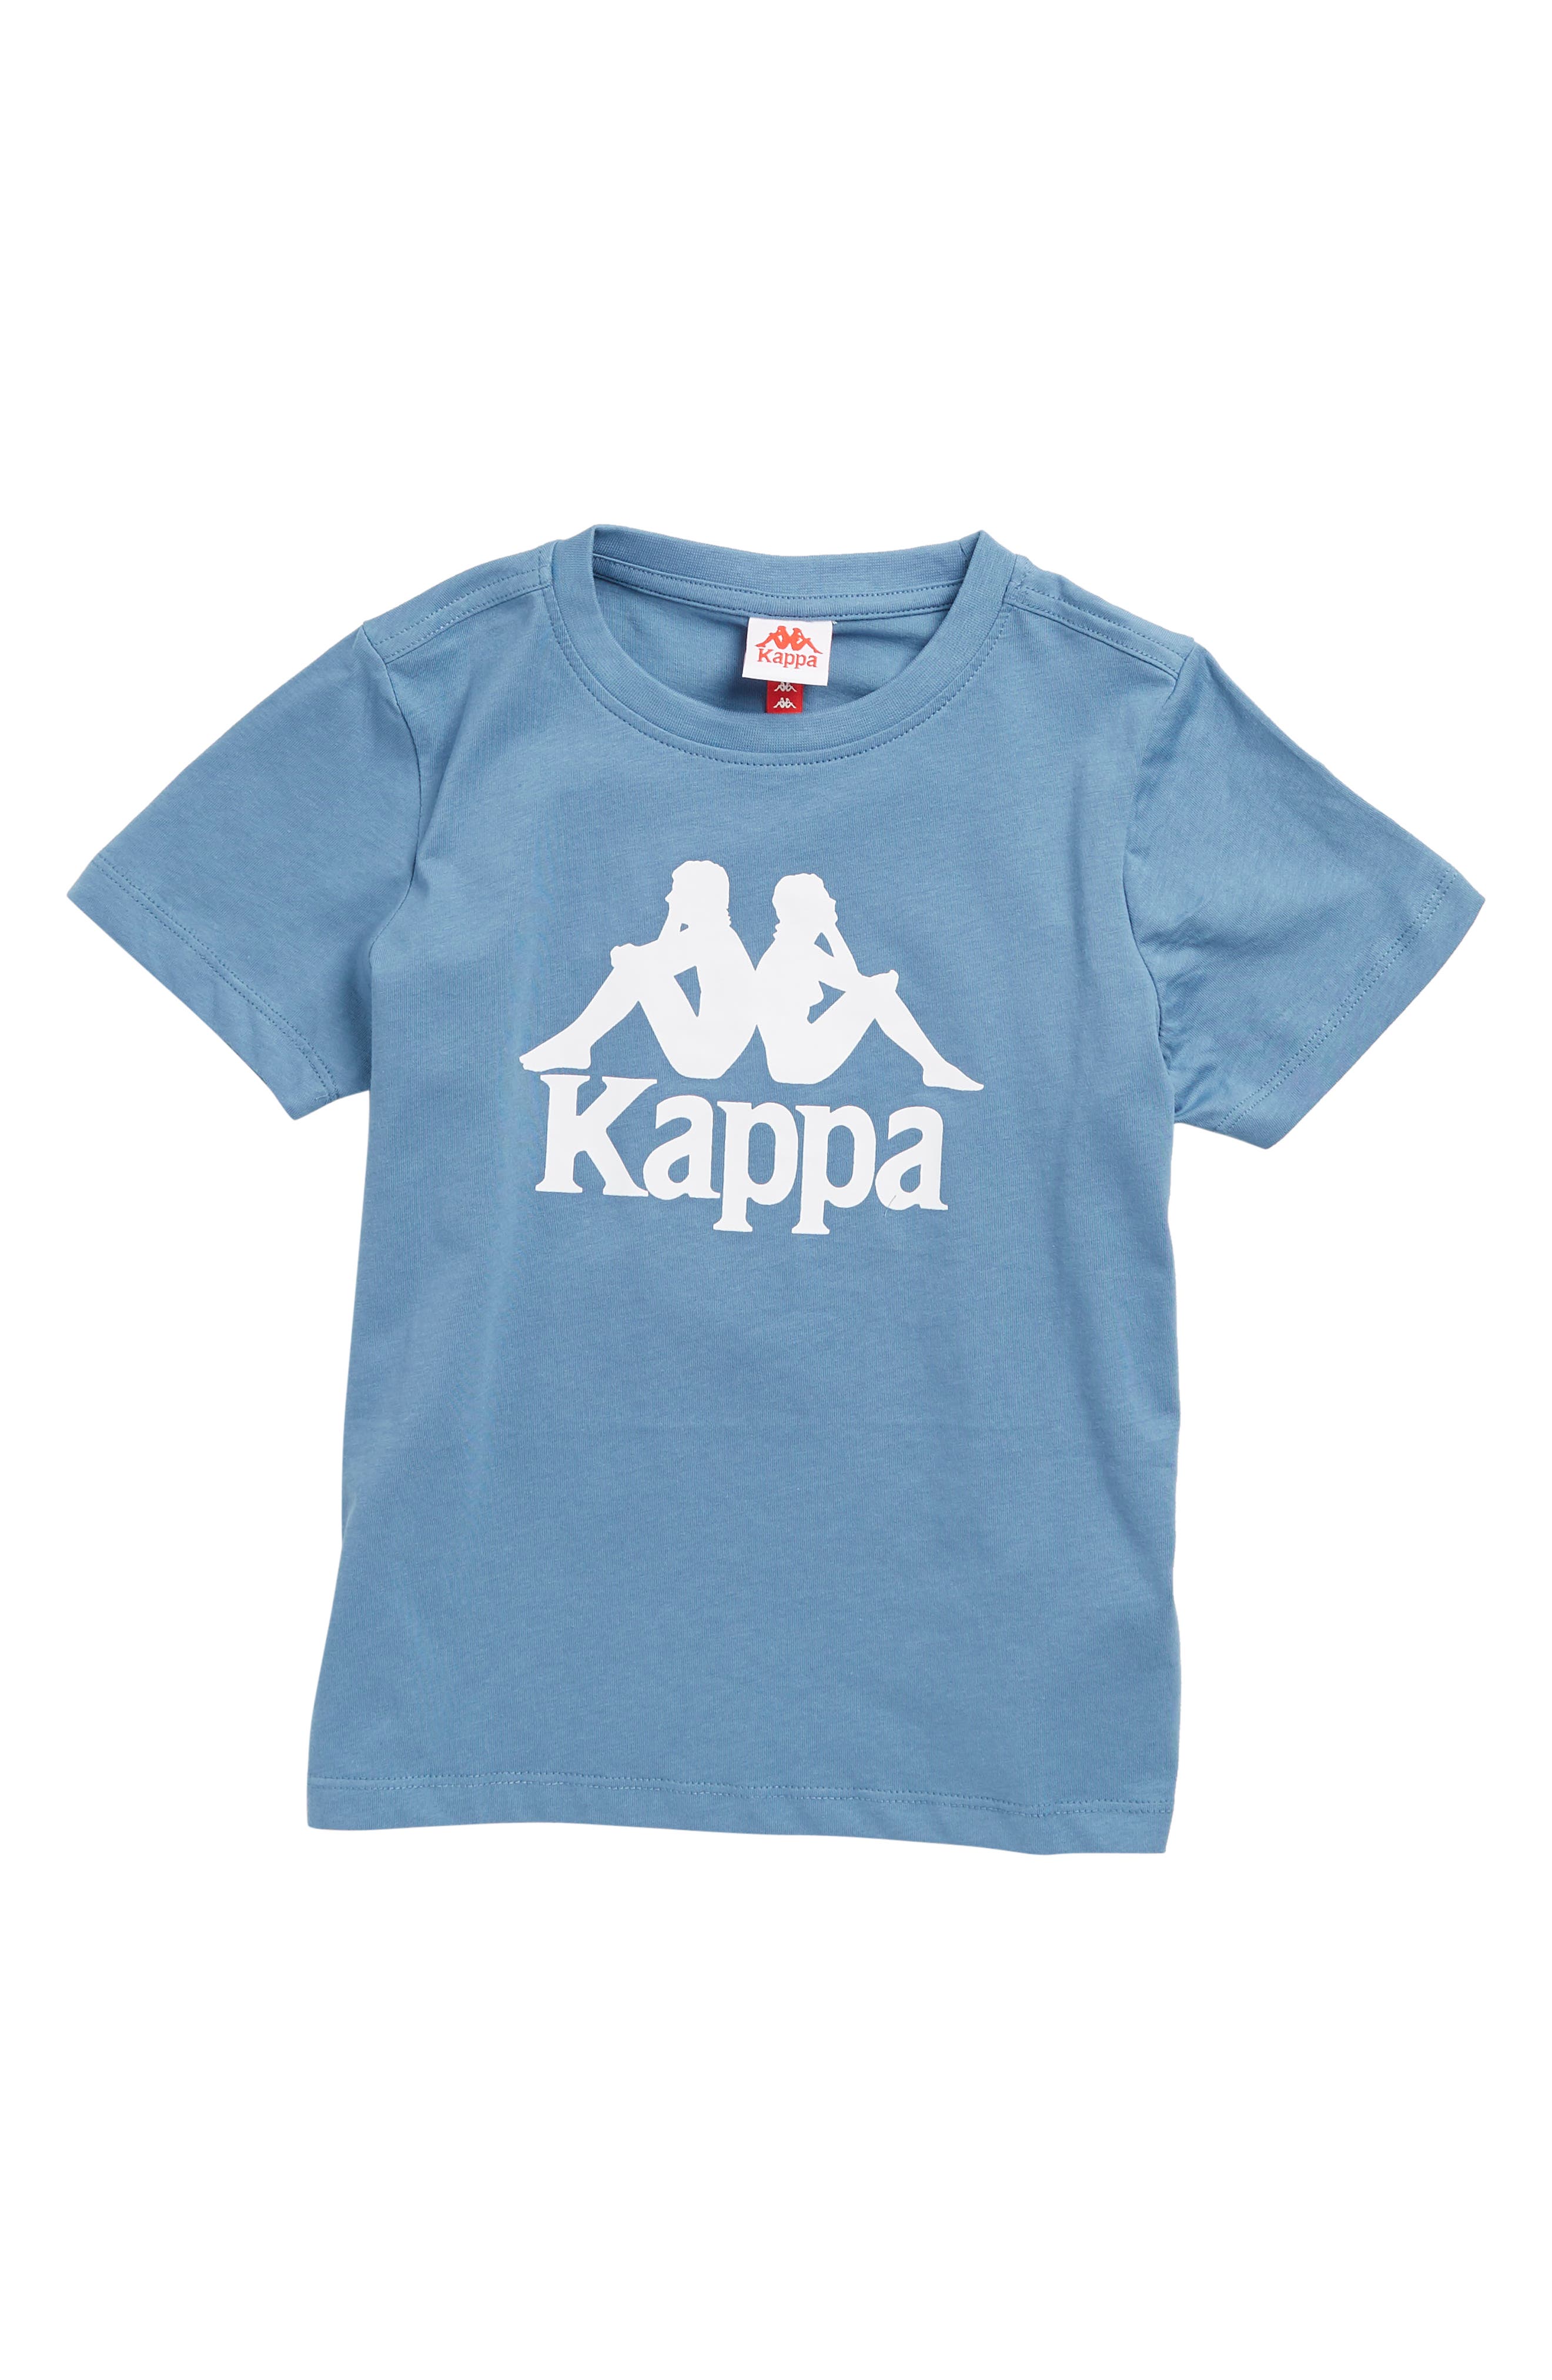 Kappa Kids' Authentic Estessi Logo Cotton Graphic Tee in Blue Steel-Bright White at Nordstrom, Size 8Y Us